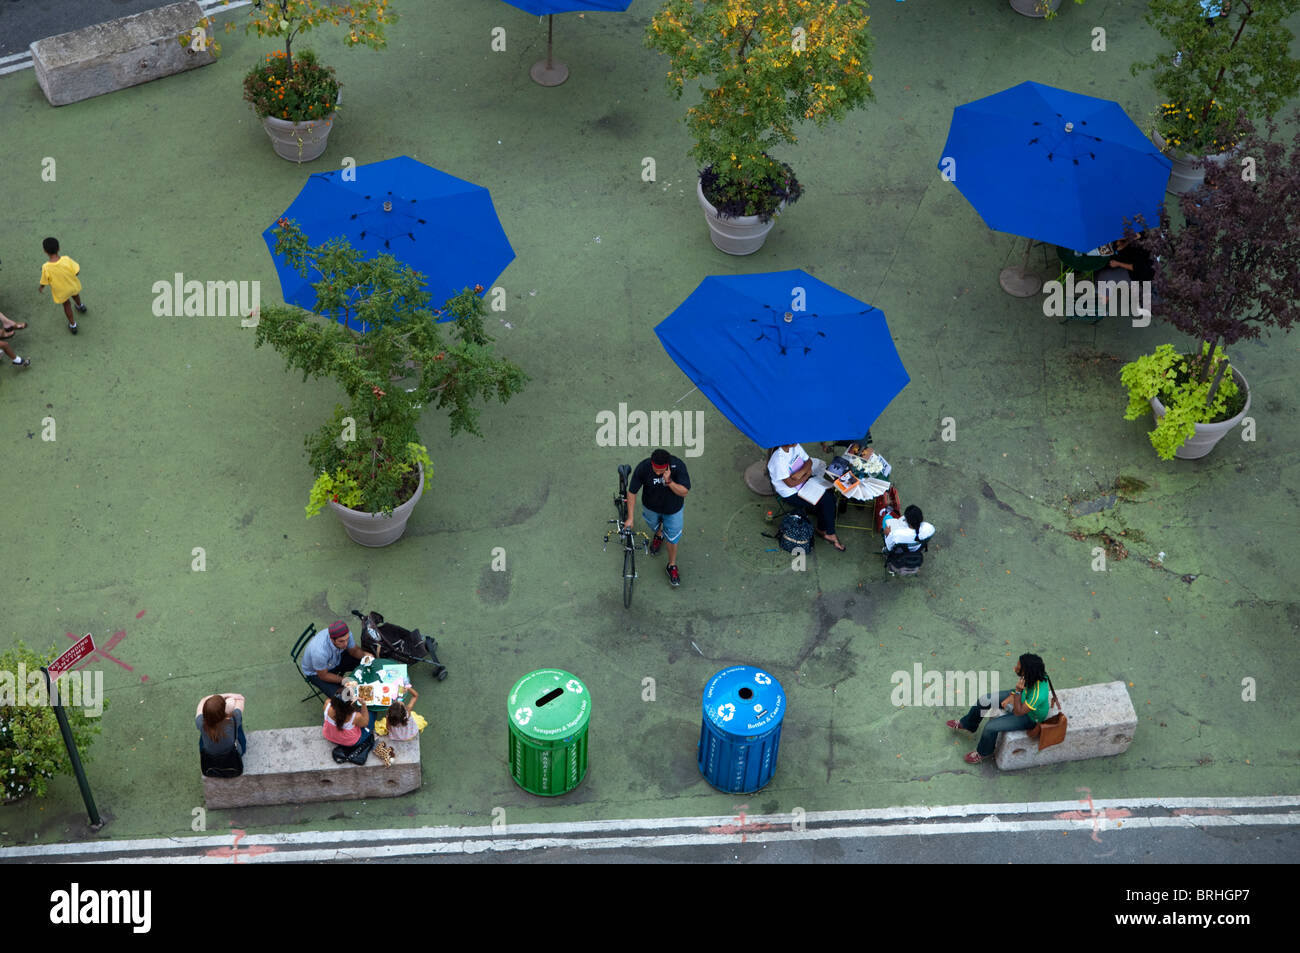 A public space in the Brooklyn neighborhood of Dumbo in New York Stock Photo